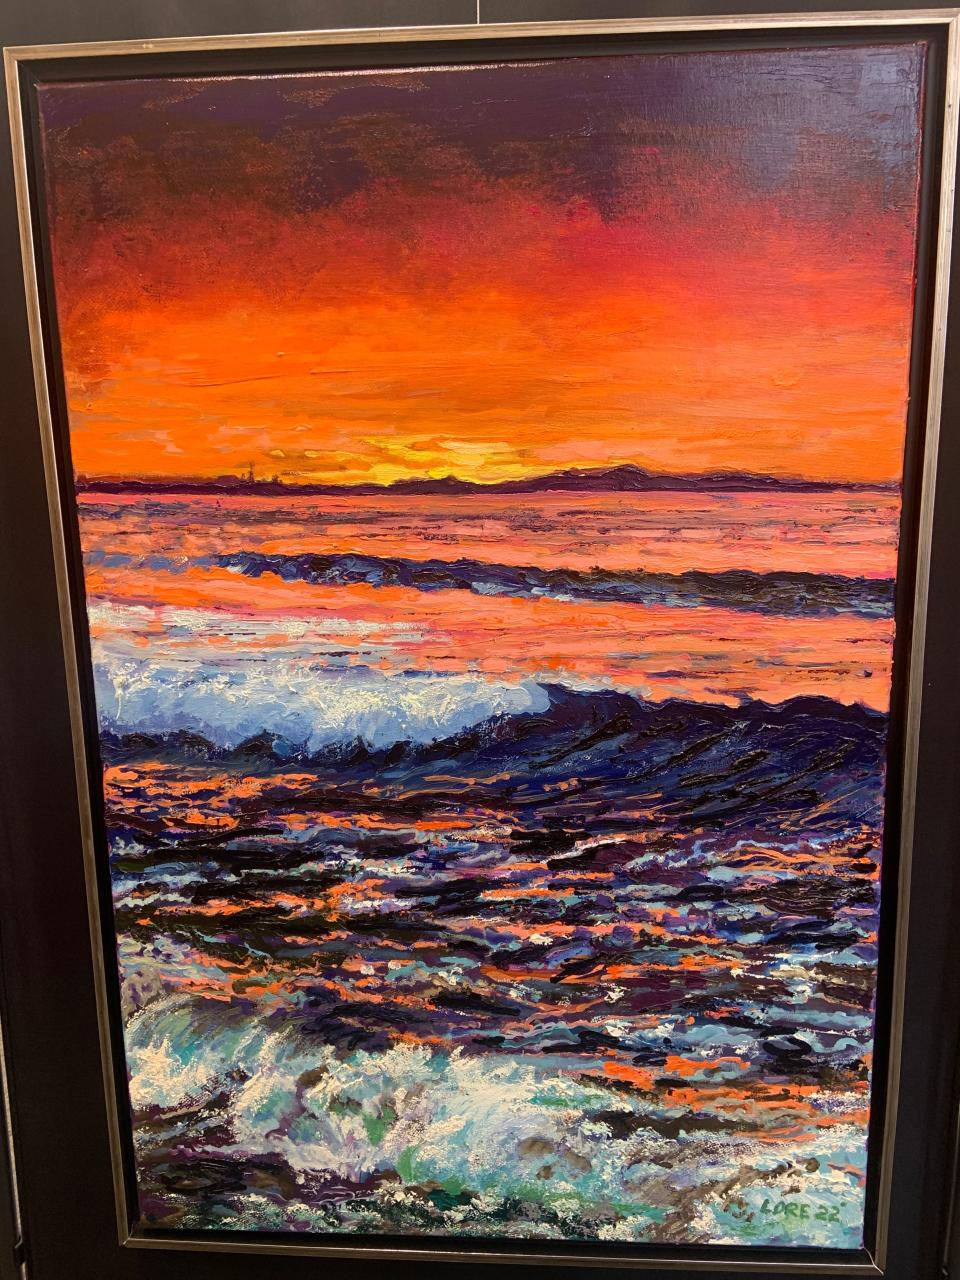 One of Mark Lore's paintings, "Firewater," on display in the exhibit "The First 50 Years," which will run through May 26 at the Gardner Museum.